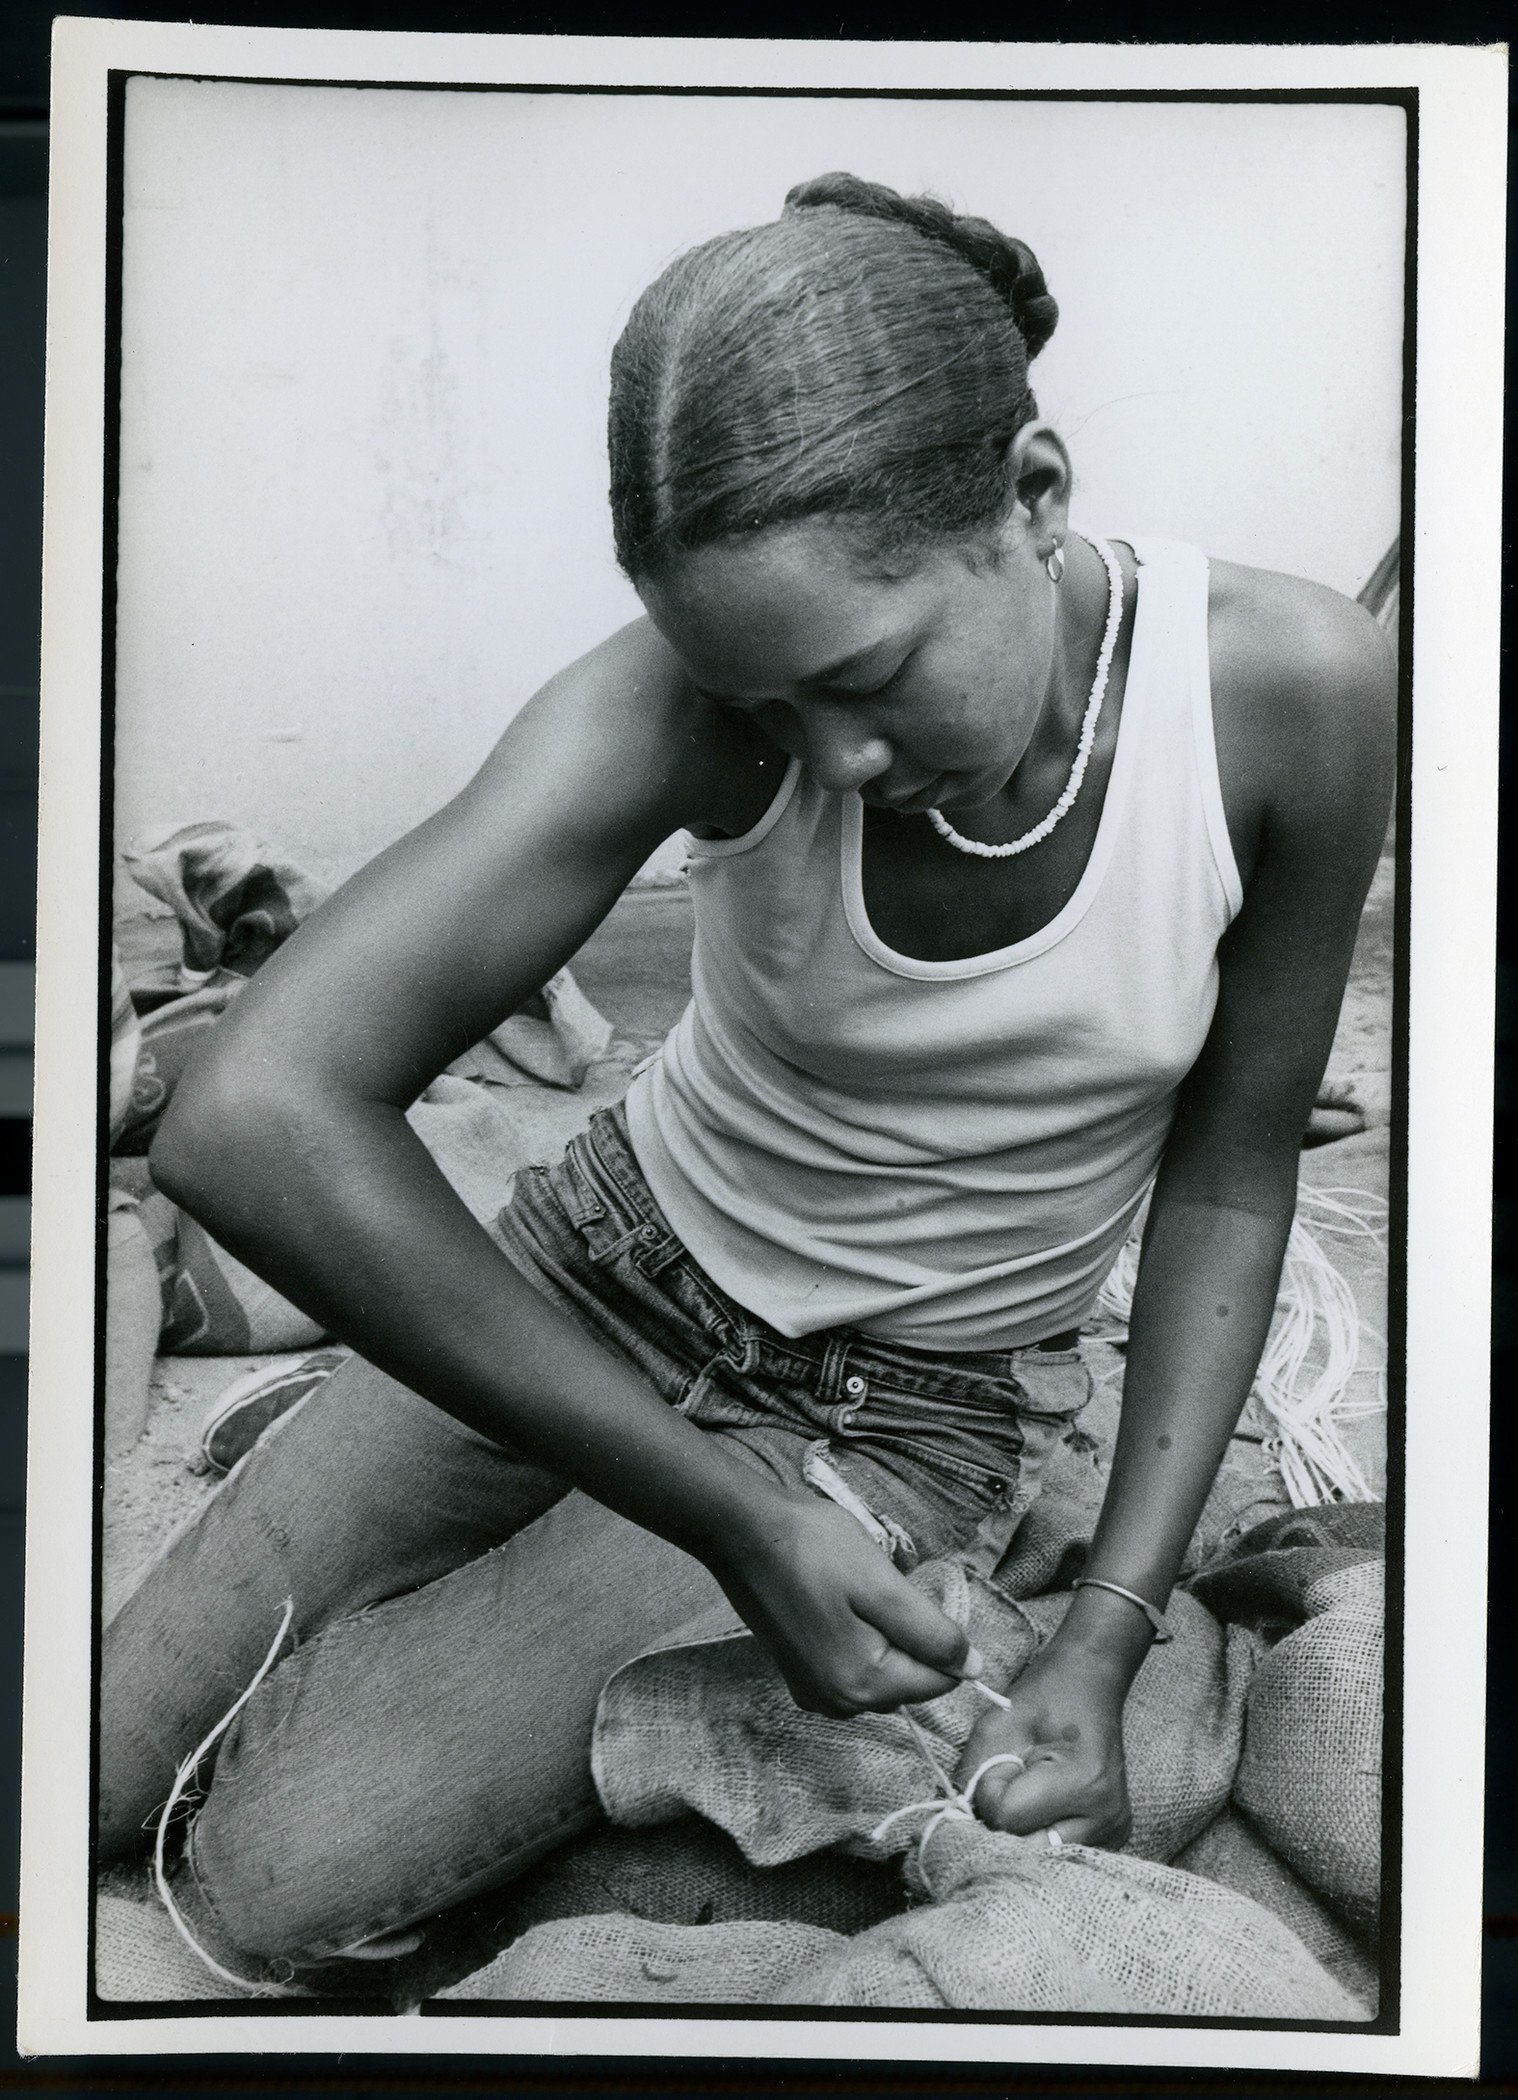  Tying a sandbag during the production of  The Great Wall of Los Angeles , © SPARC 1976, courtesy of Judith F. Baca and the SPARC archives. Photo: Linda Eber, 1976.&nbsp; 